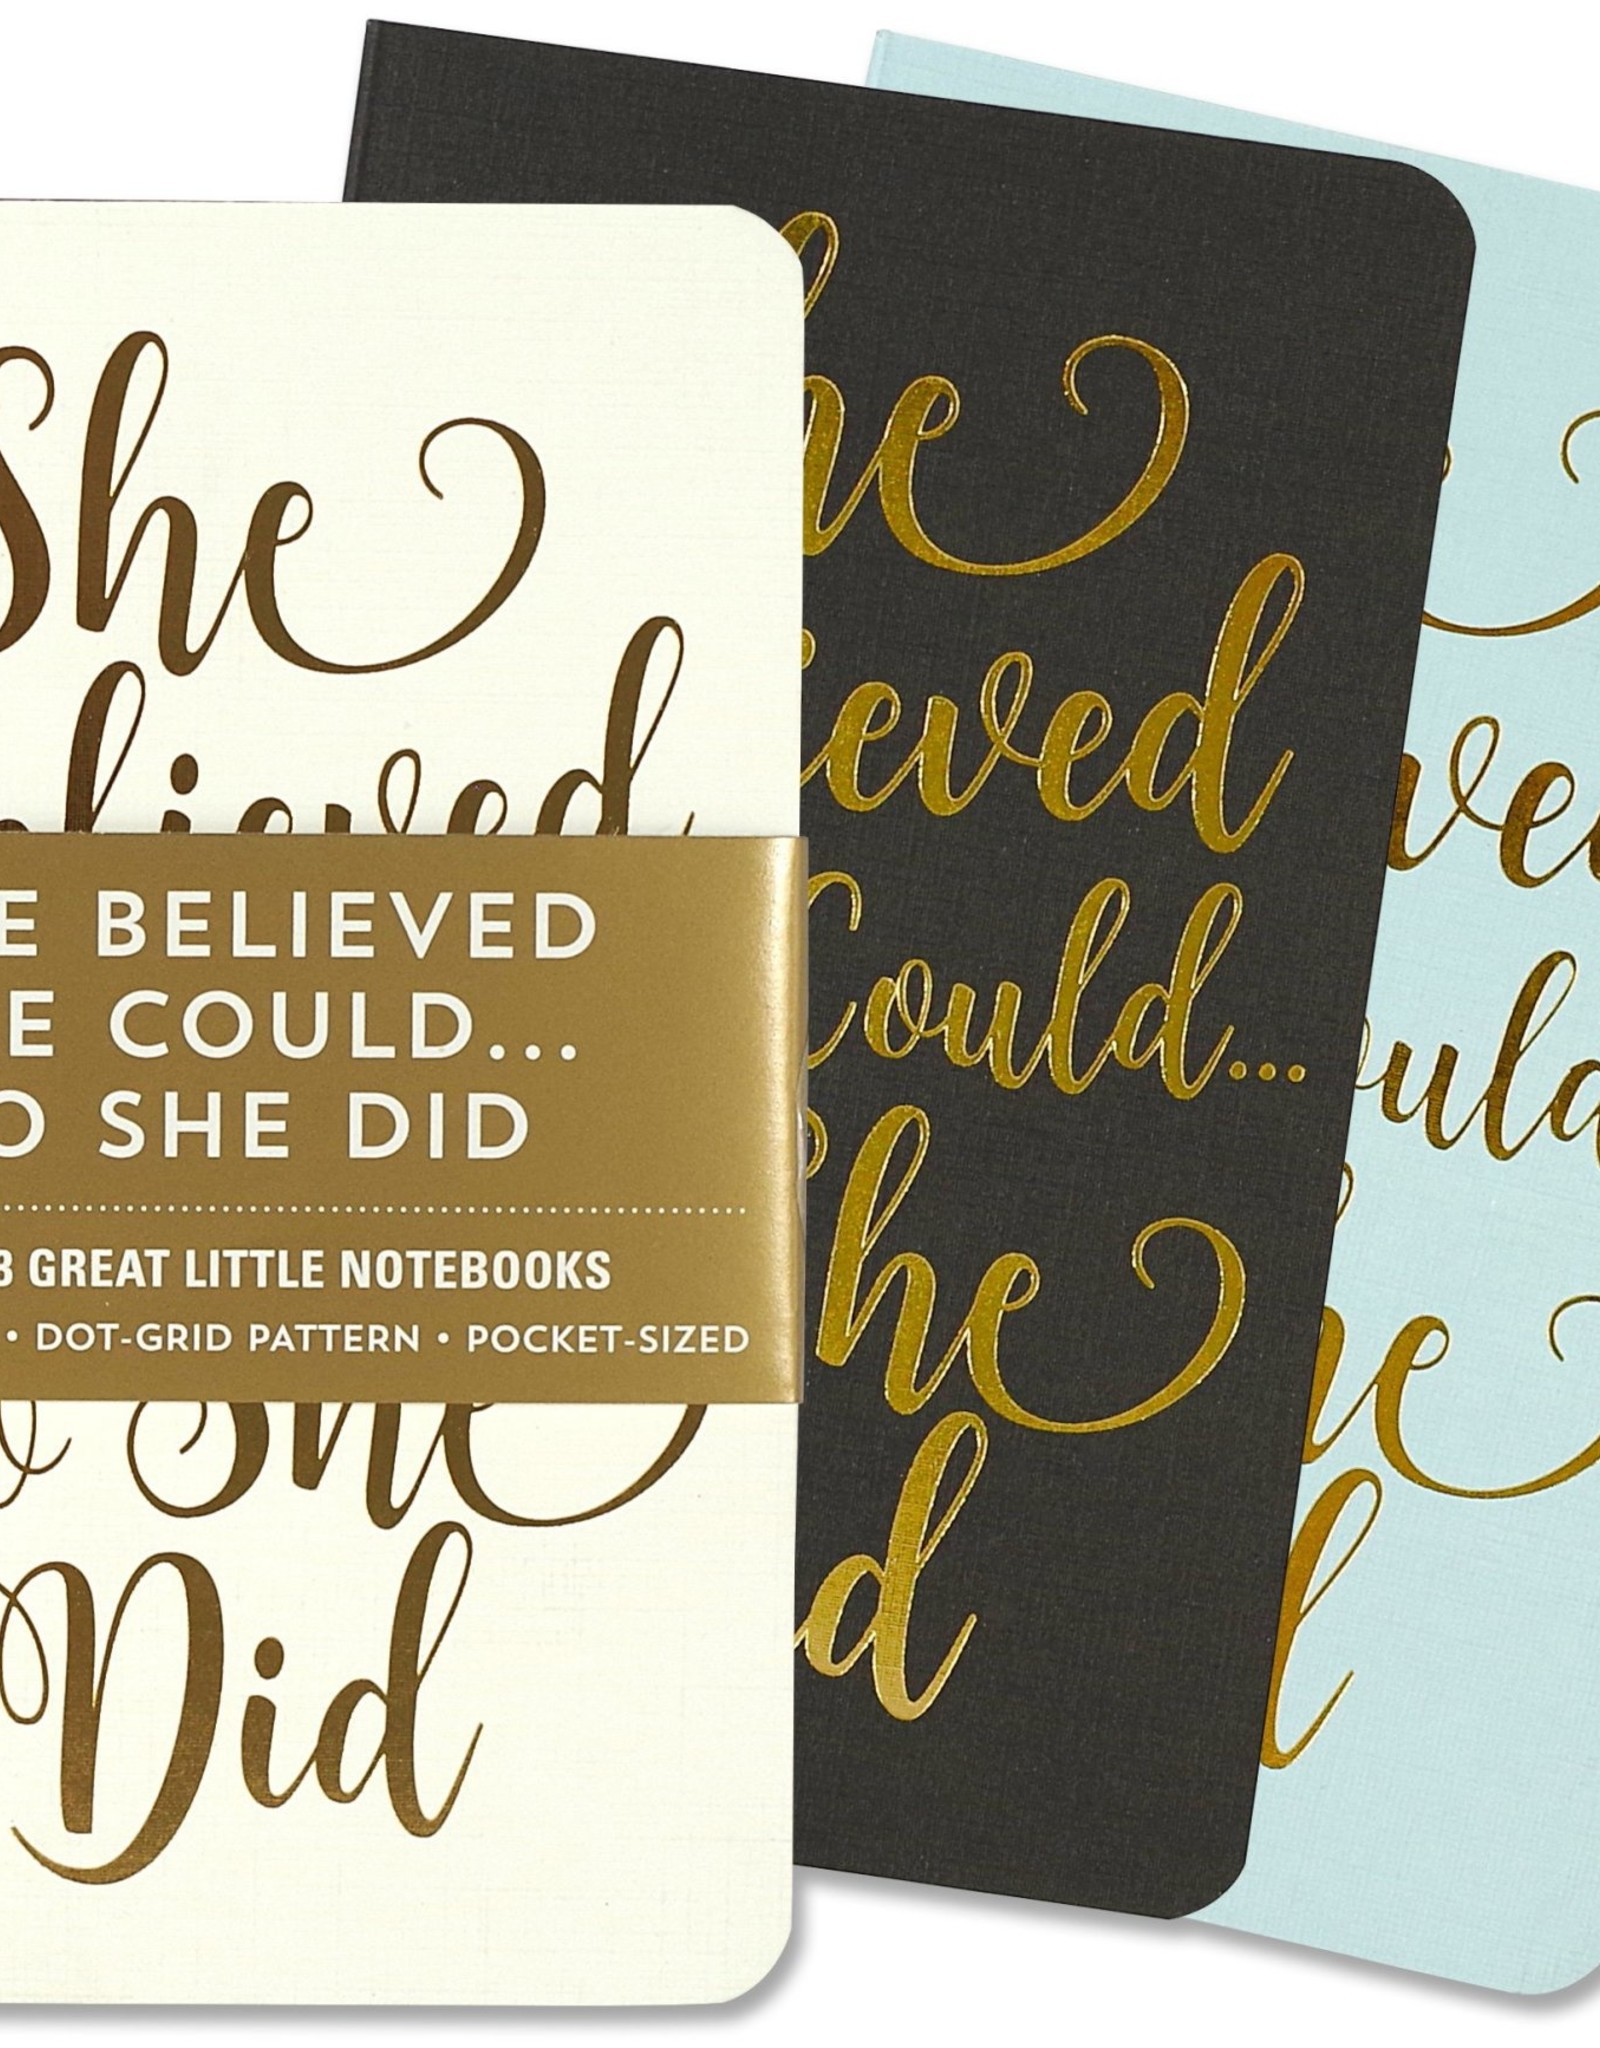 Peter Pauper Press JOTTER MINI NOTEBOOKS: SHE BELIEVED SHE COULD